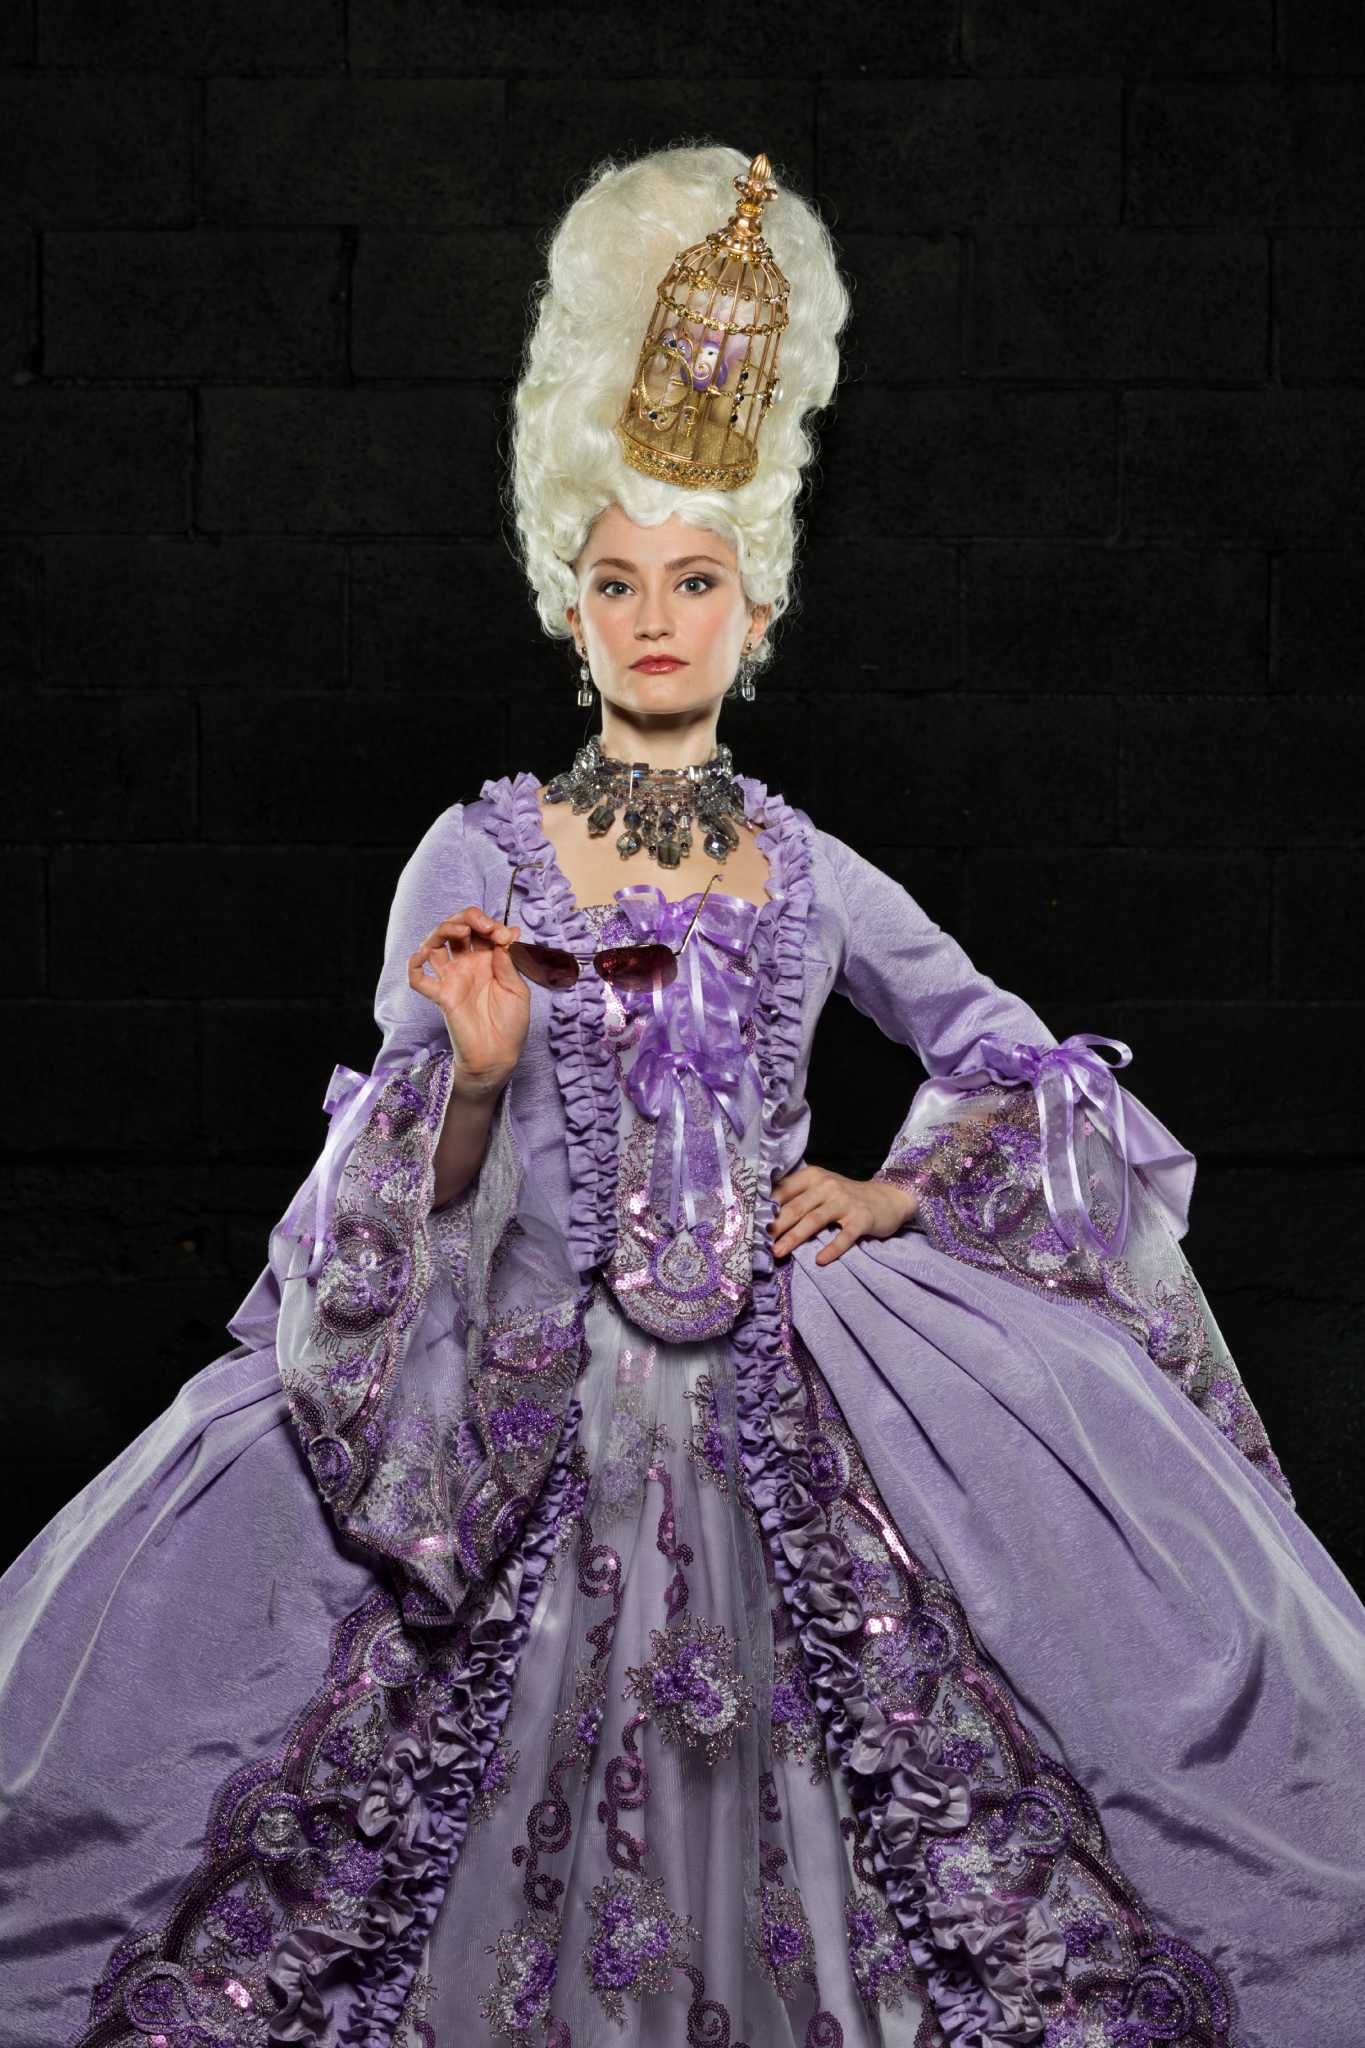 Fashion is My Muse: Revisiting Marie Antoinette's Corset Rebellion